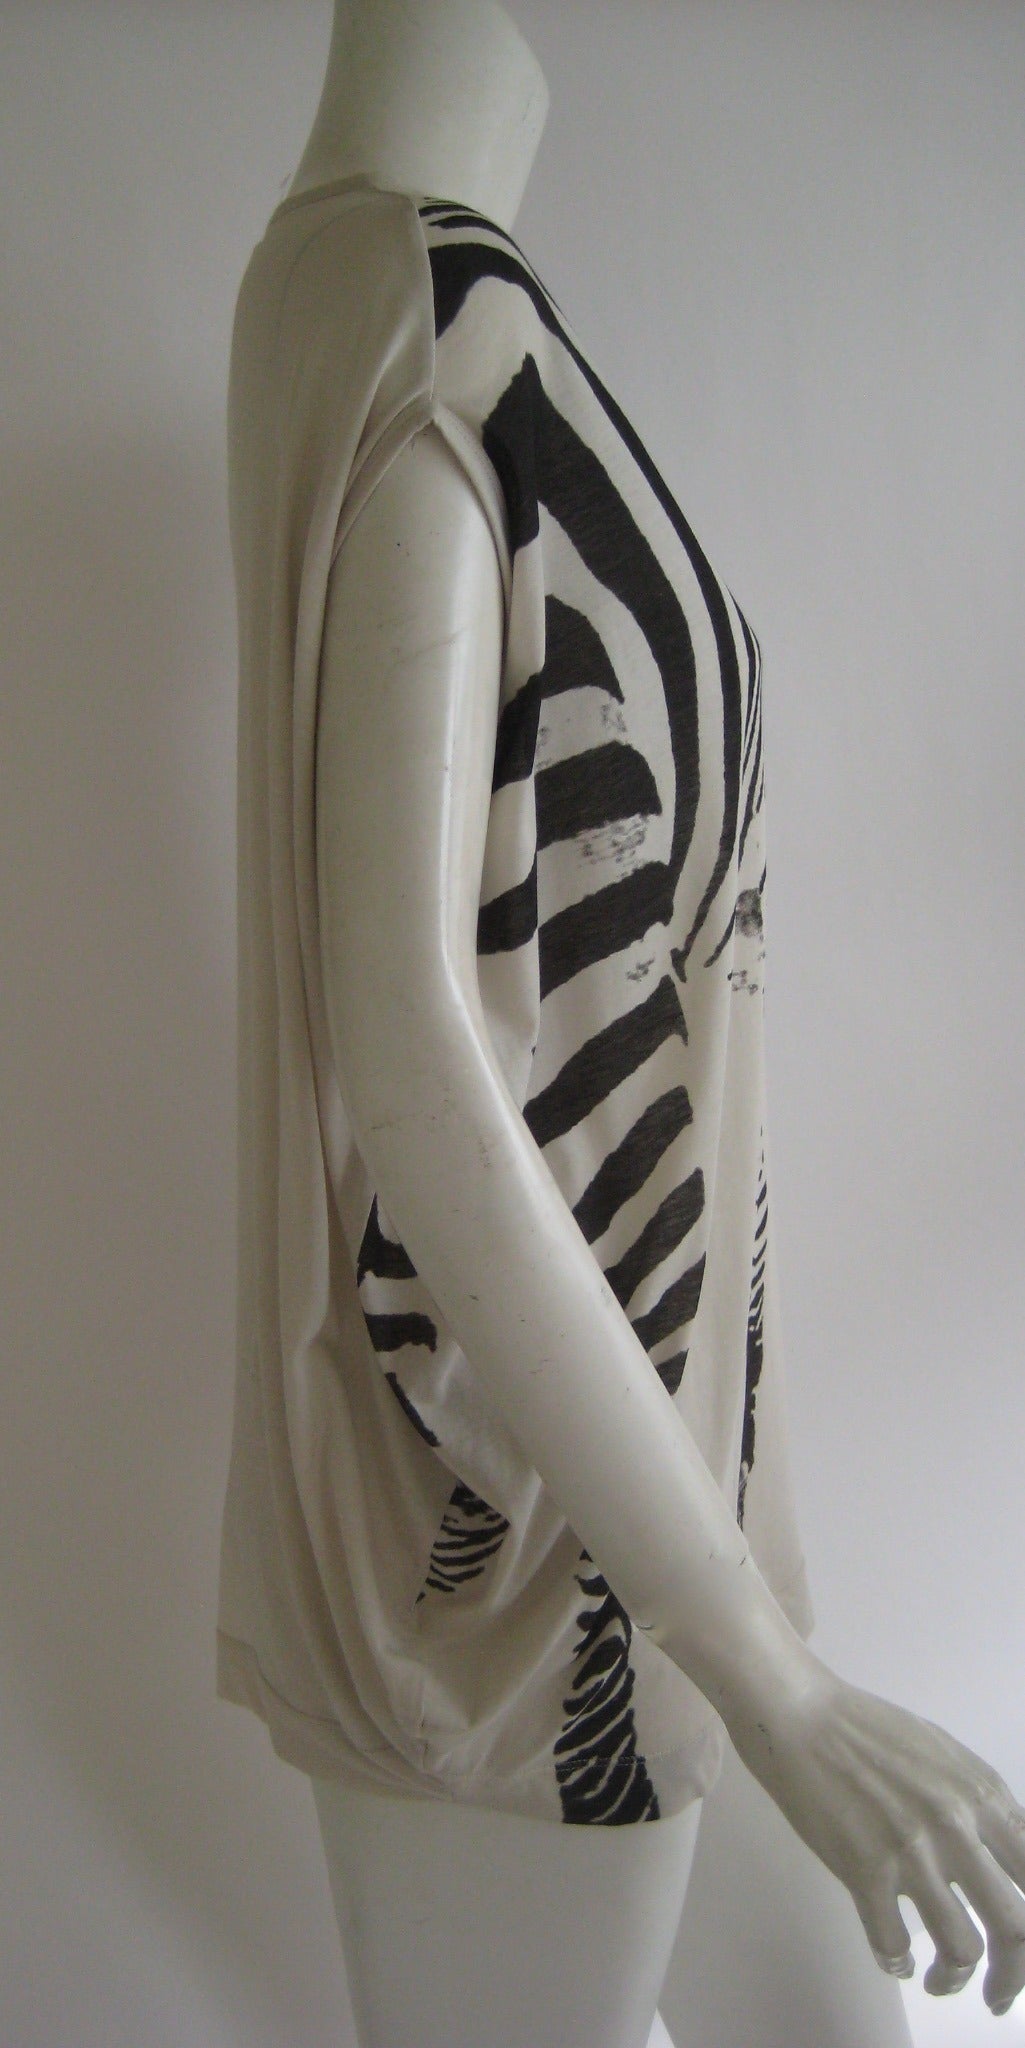 Stella McCartney Zebra t Shirt In Excellent Condition For Sale In Chicago, IL